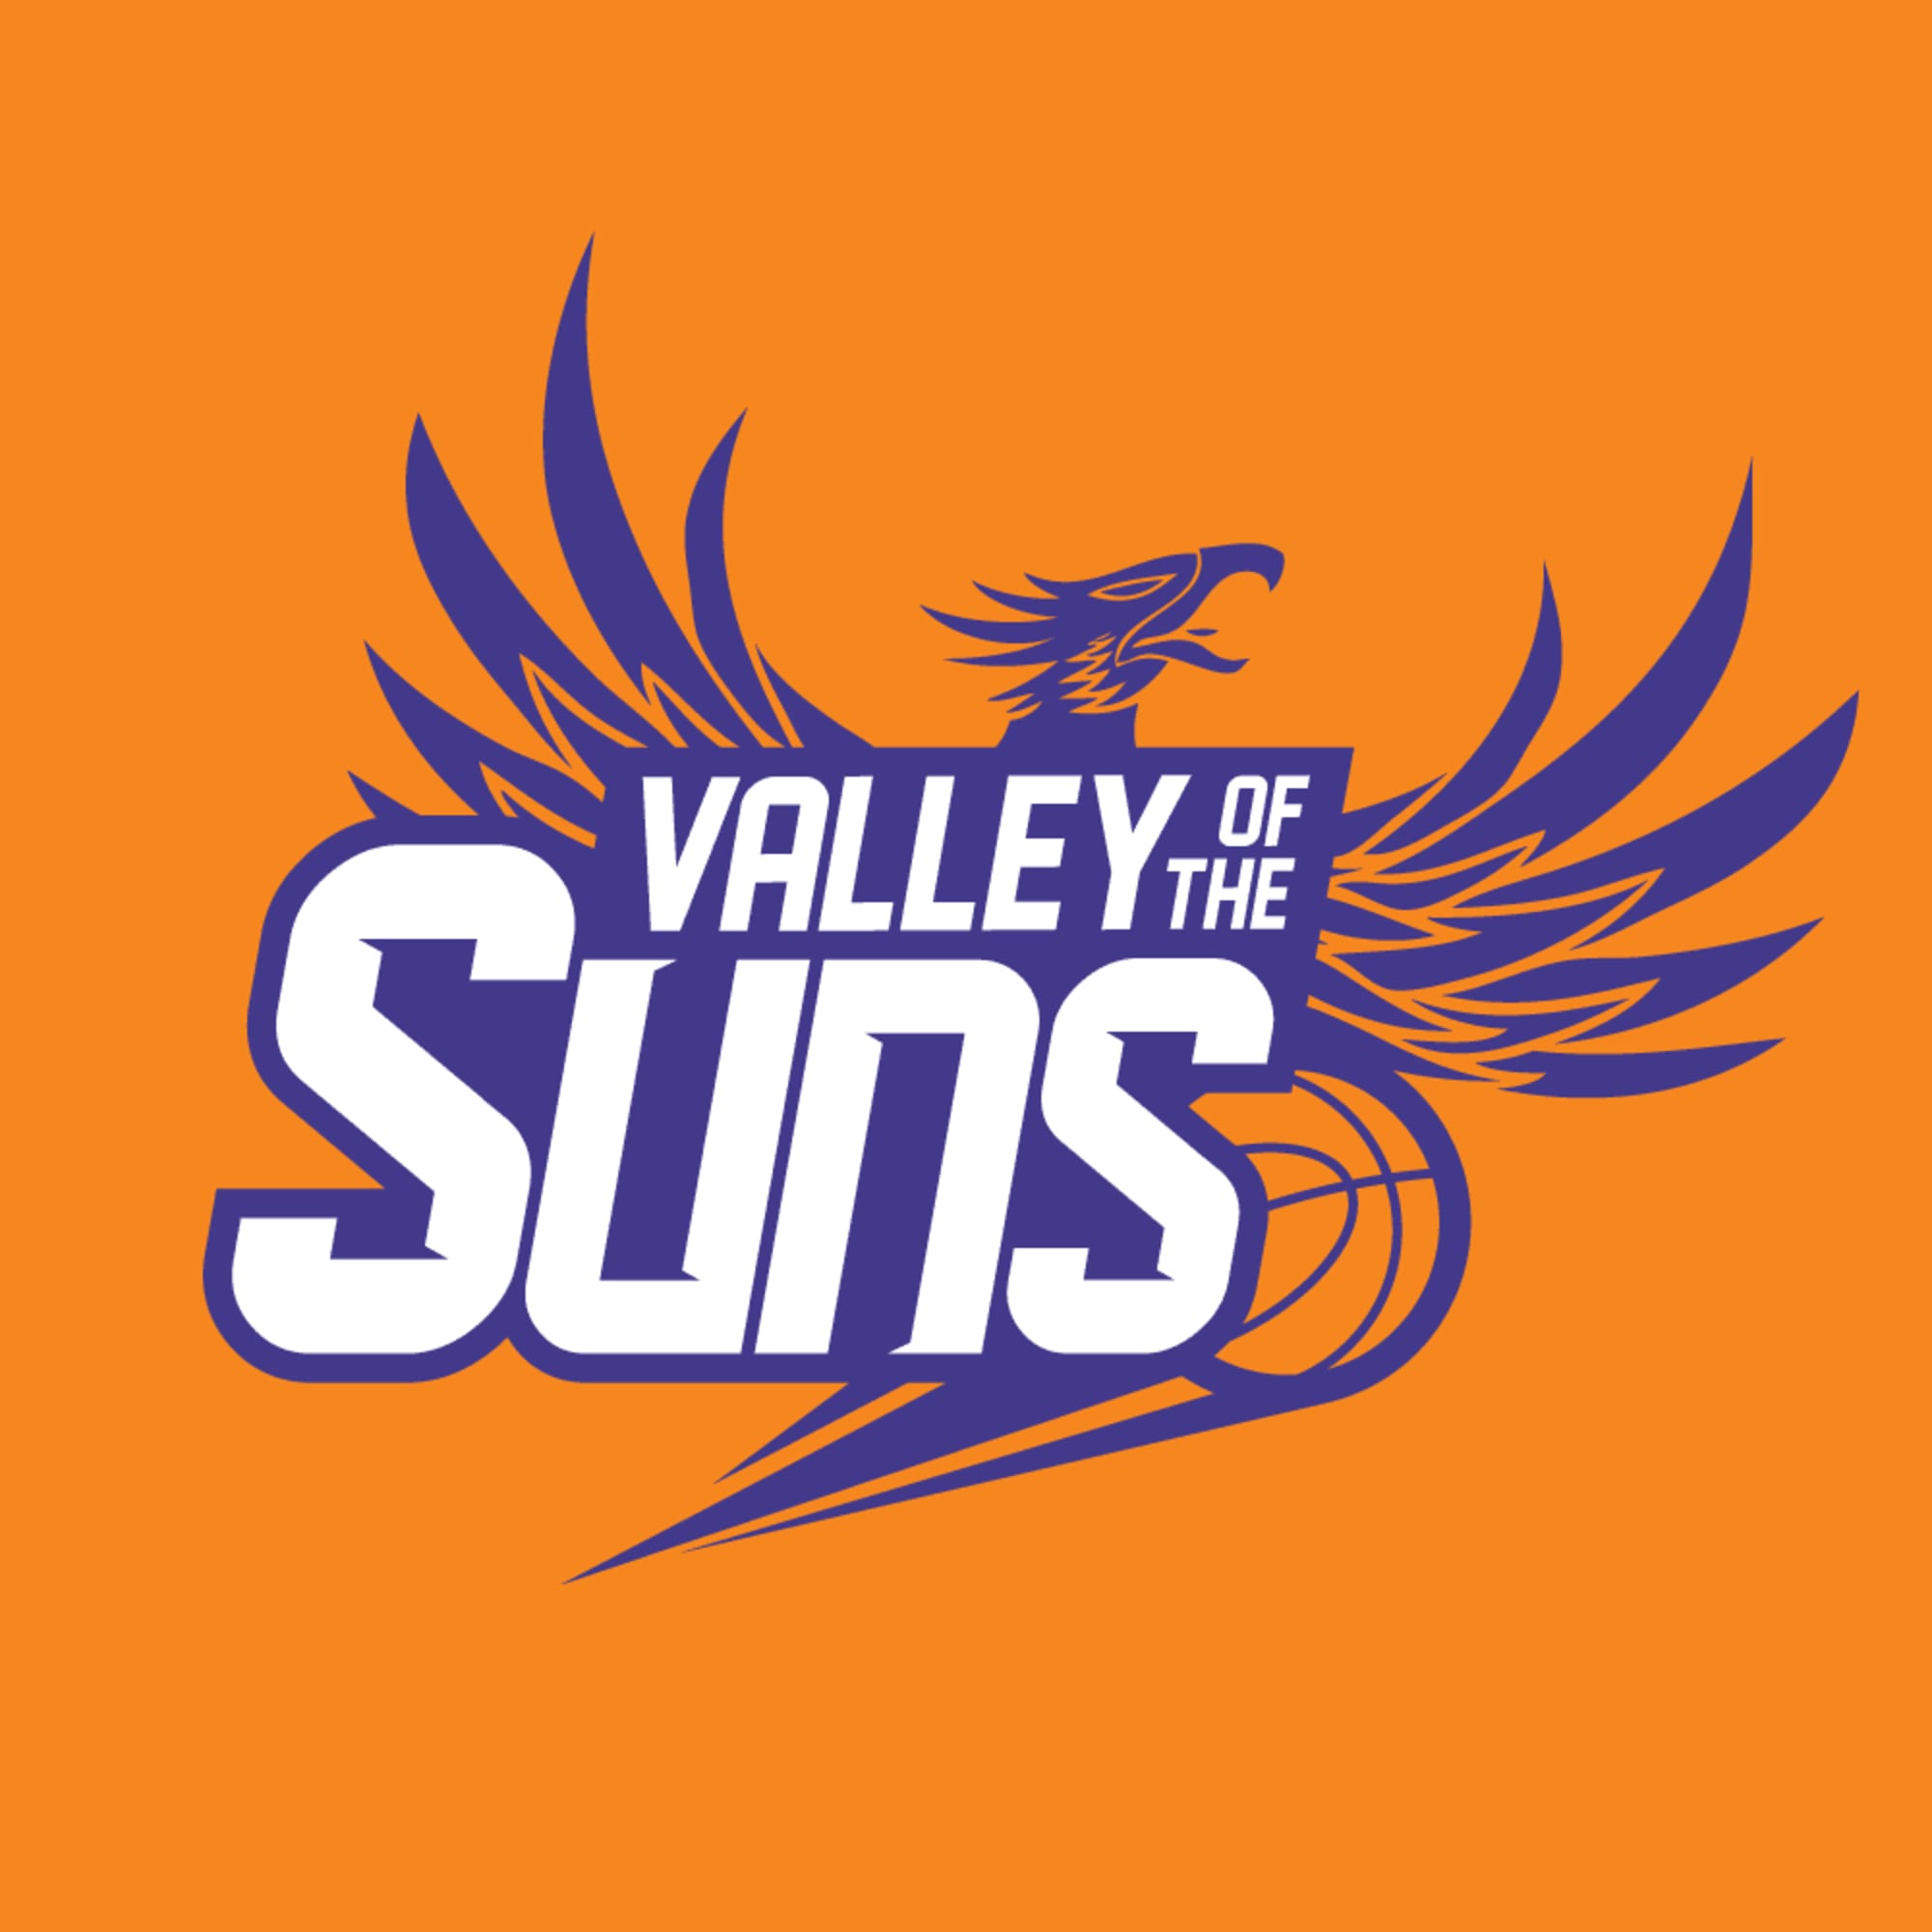 Phoenix Suns Rumors, Trades, Free Agency - Valley of the Suns